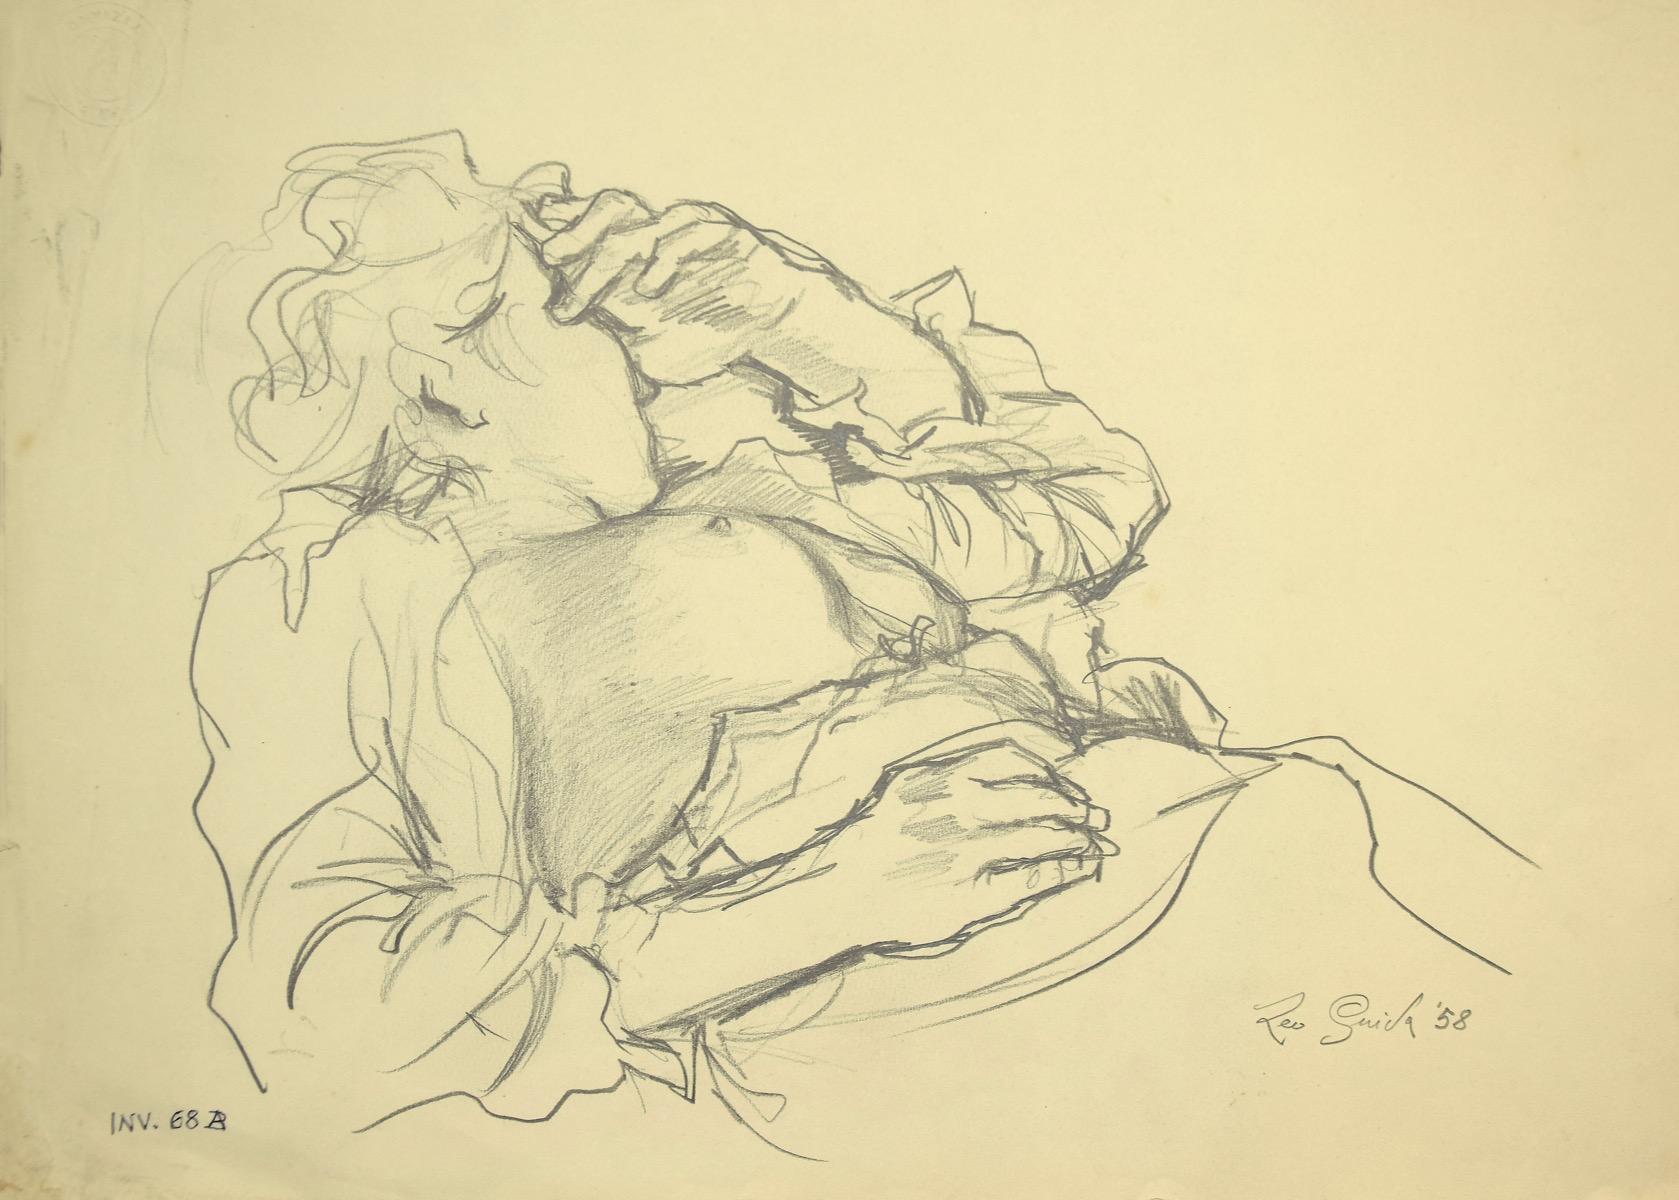 Nude of Woman is an original drawing in pencil on ivory-colored paper by Leo Guida in 1958s.

The state of preservation is good.

On the lower right margin hand-signed and dated.

 On the lower left margin "INV. 68 B".

The artwork represents a nude